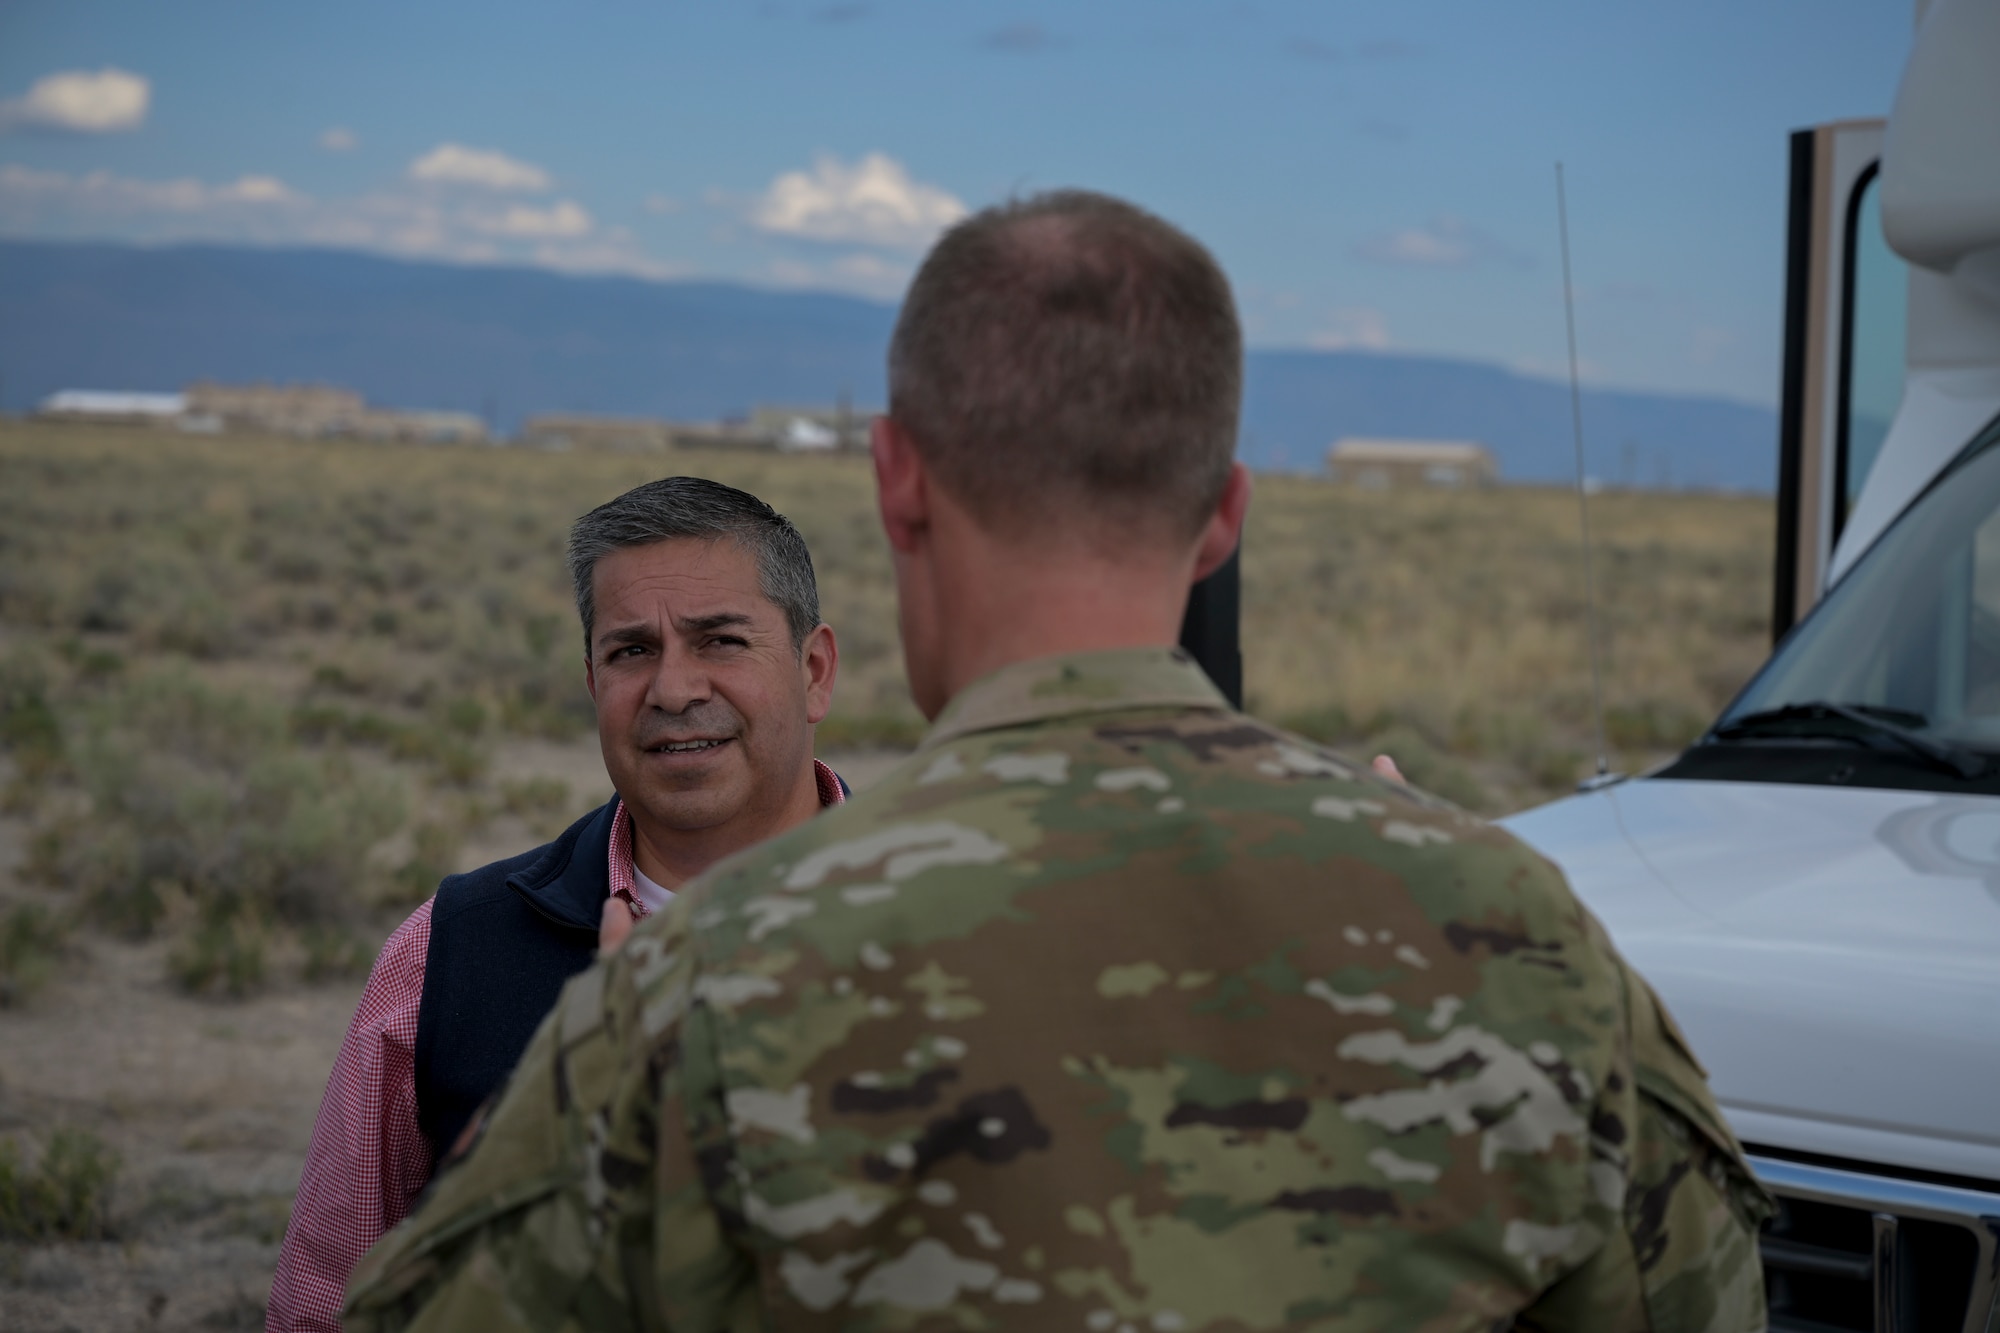 Sen. Ben Ray Lujan, of New Mexico, speaks with Col. Justin Spears, 49th Wing commander, upon arrival to the Holloman High Speed Test Track on Holloman Air force Base, New Mexico, August 15, 2022. HHSTT is the world’s premier rocket sled test track. (U.S. Air Force photo by Airman 1st Class Antonio Salfran)